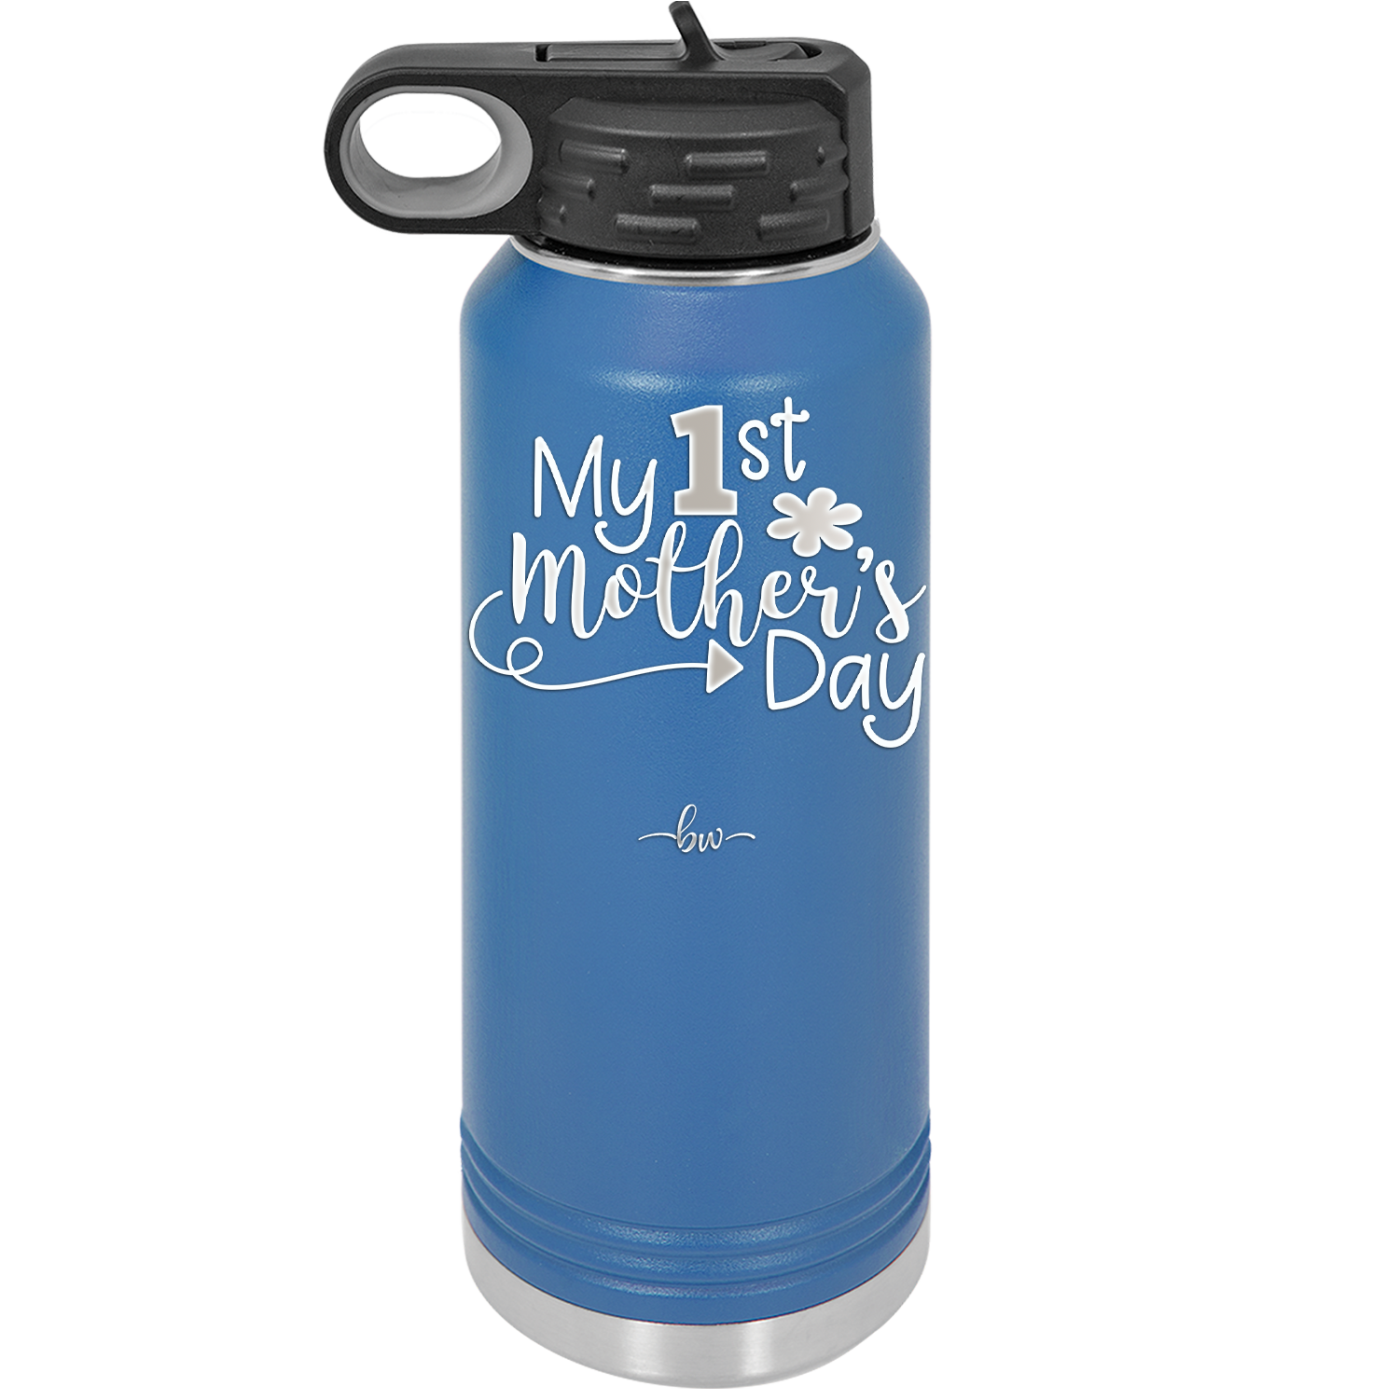 My 1st Mother's Day - Laser Engraved Stainless Steel Drinkware - 2001 -